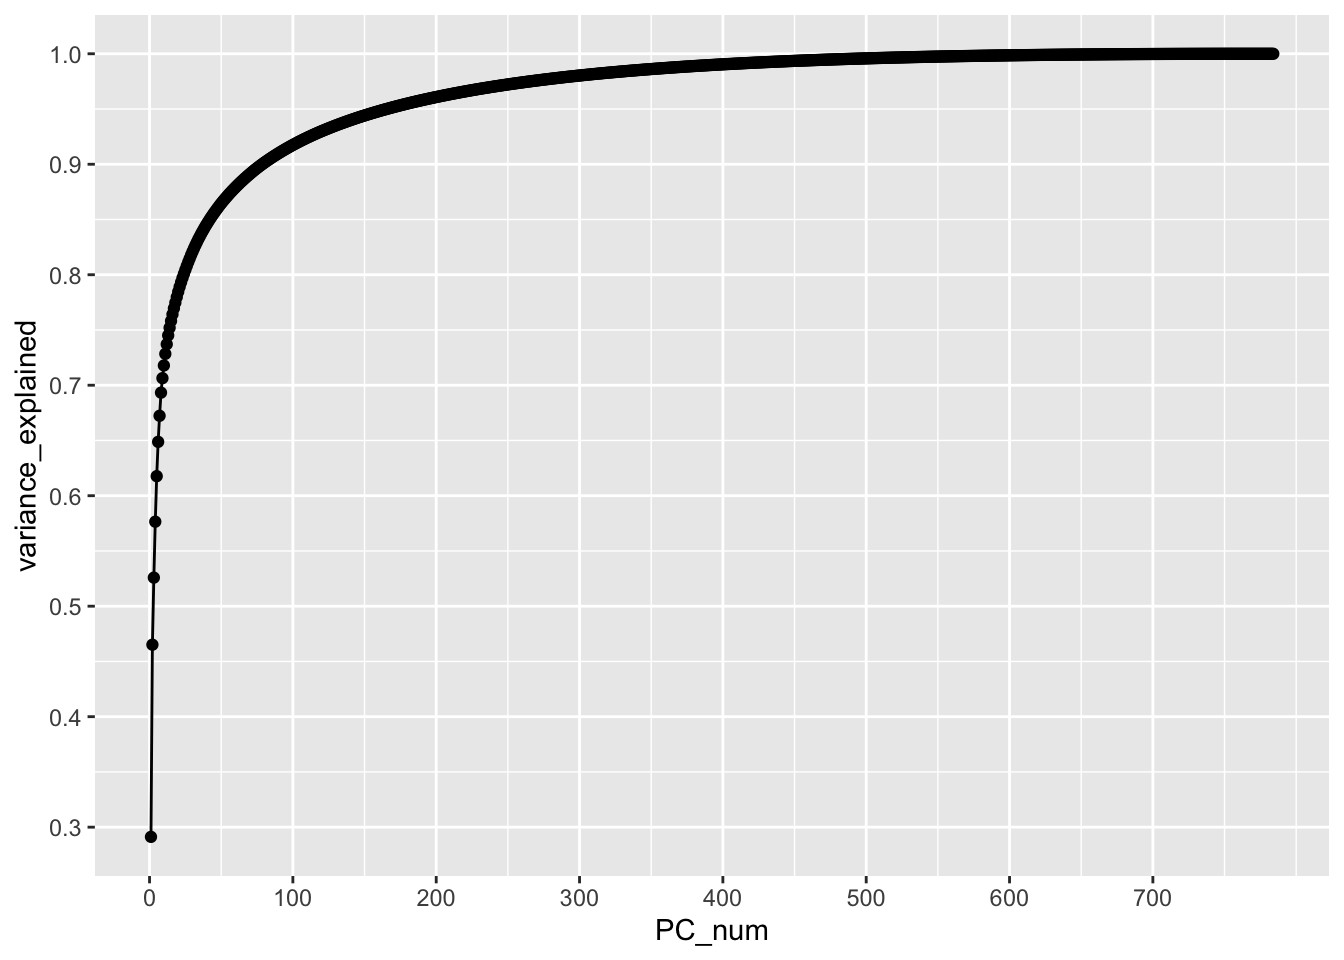 Fashion MNIST: Variance explained vs number of principal components